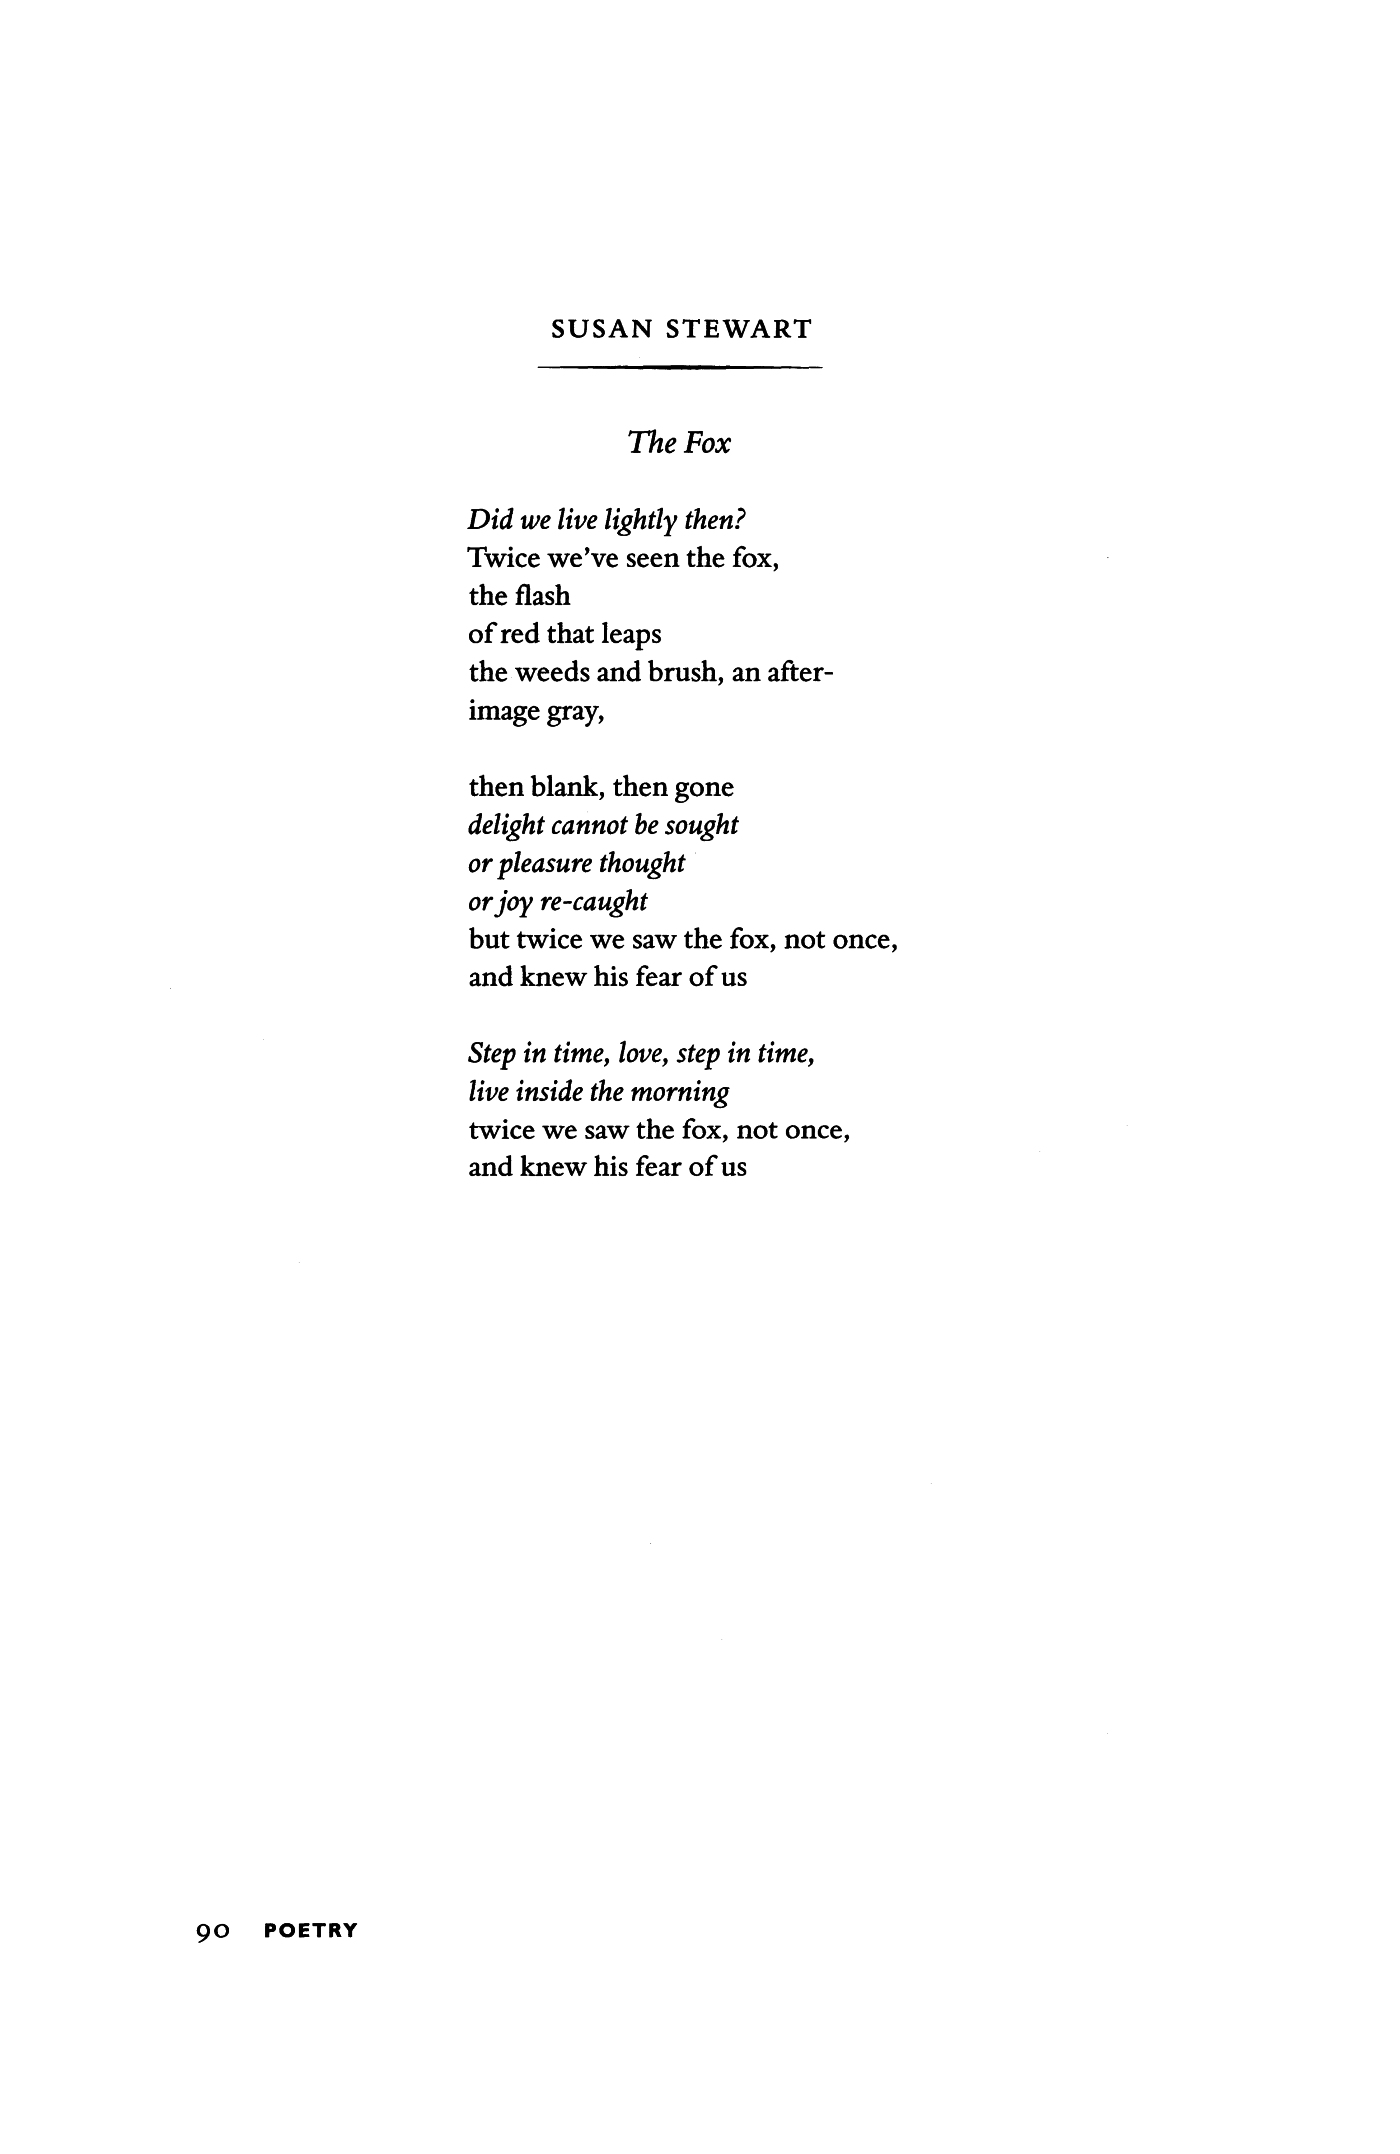 thesis for the fox poem